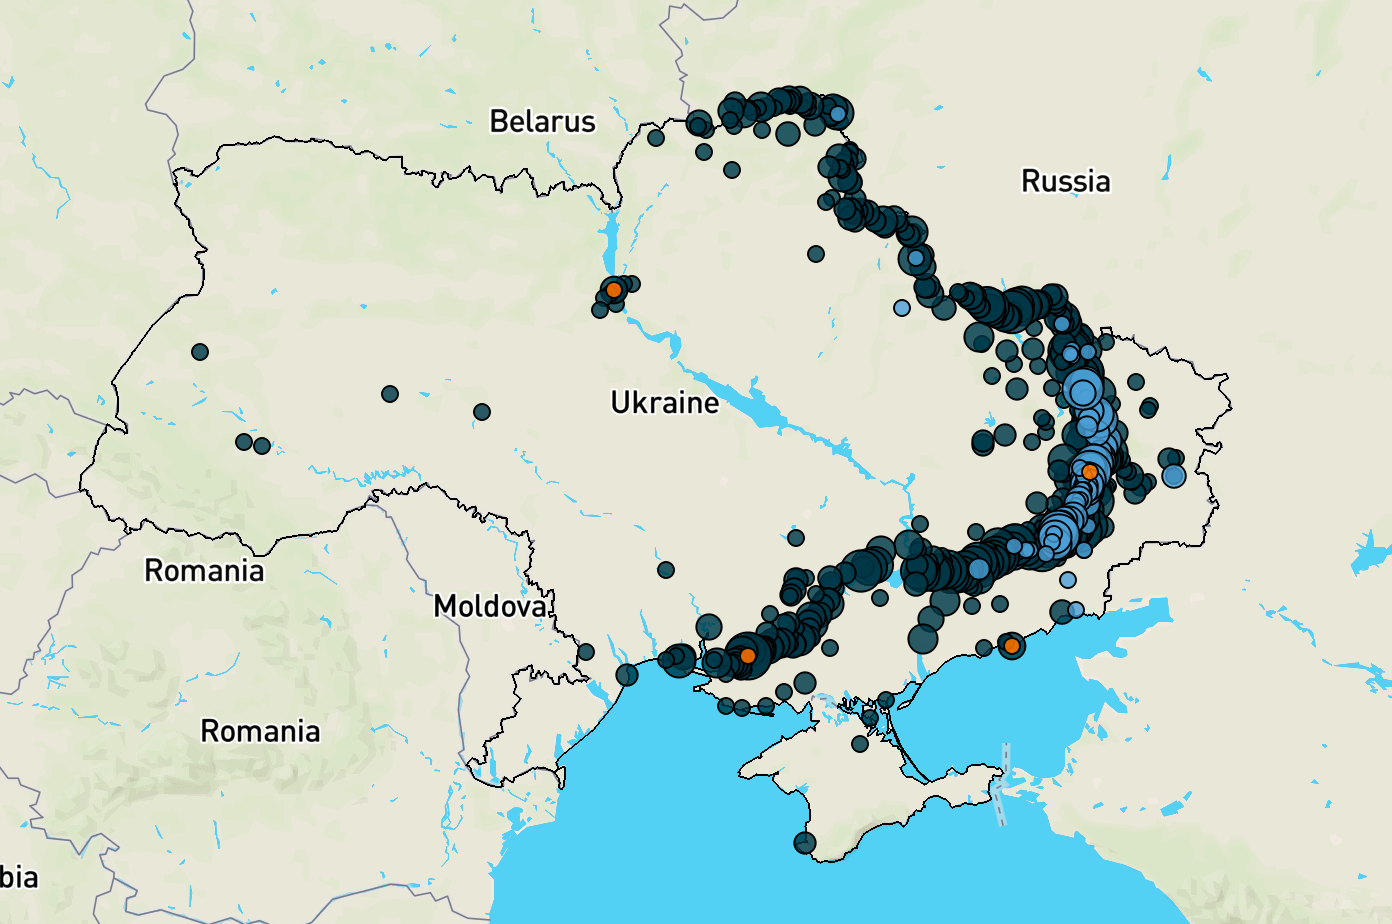 map showing political violence events in Ukraine